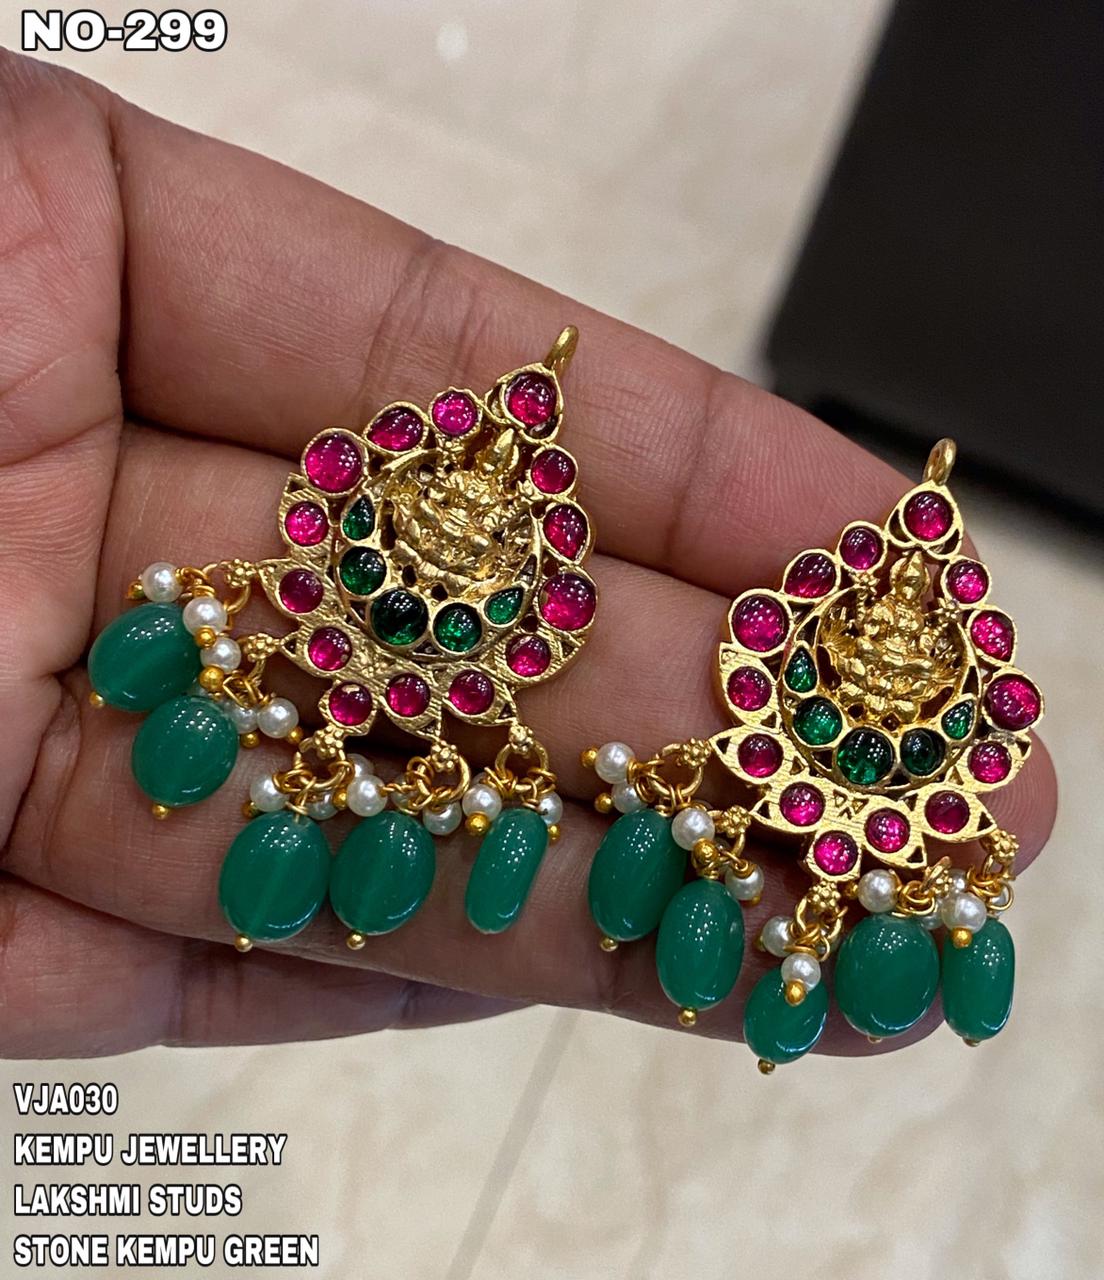 July New Collection Intimate Jewlery 2021 - Indian Jewelry Designs